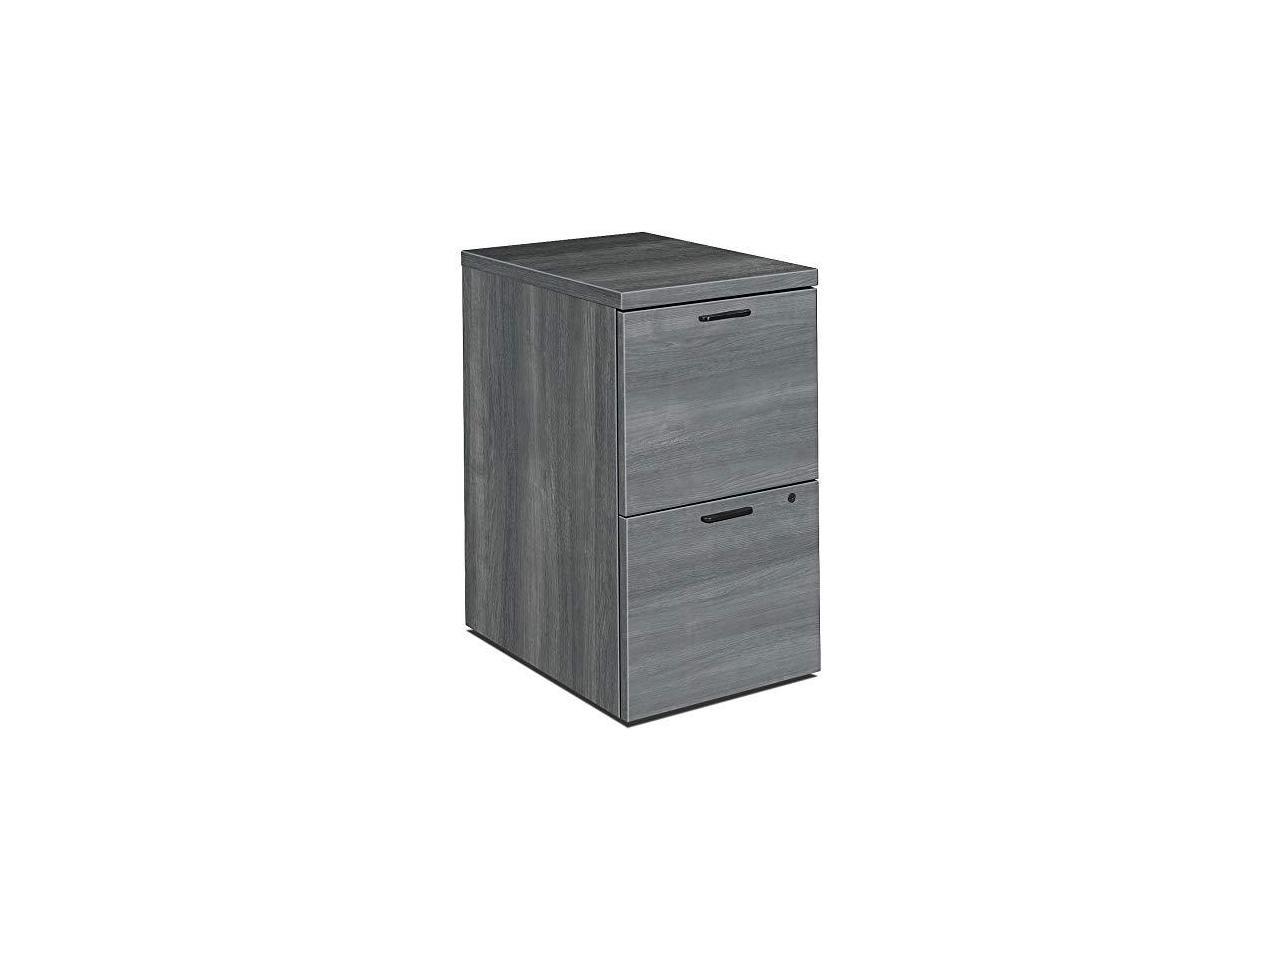 The HON HON105104LS1 15.8 x 22.8 x 28 in. 10500 Series Freestanding File & File Mobile Pedestal - image 3 of 3